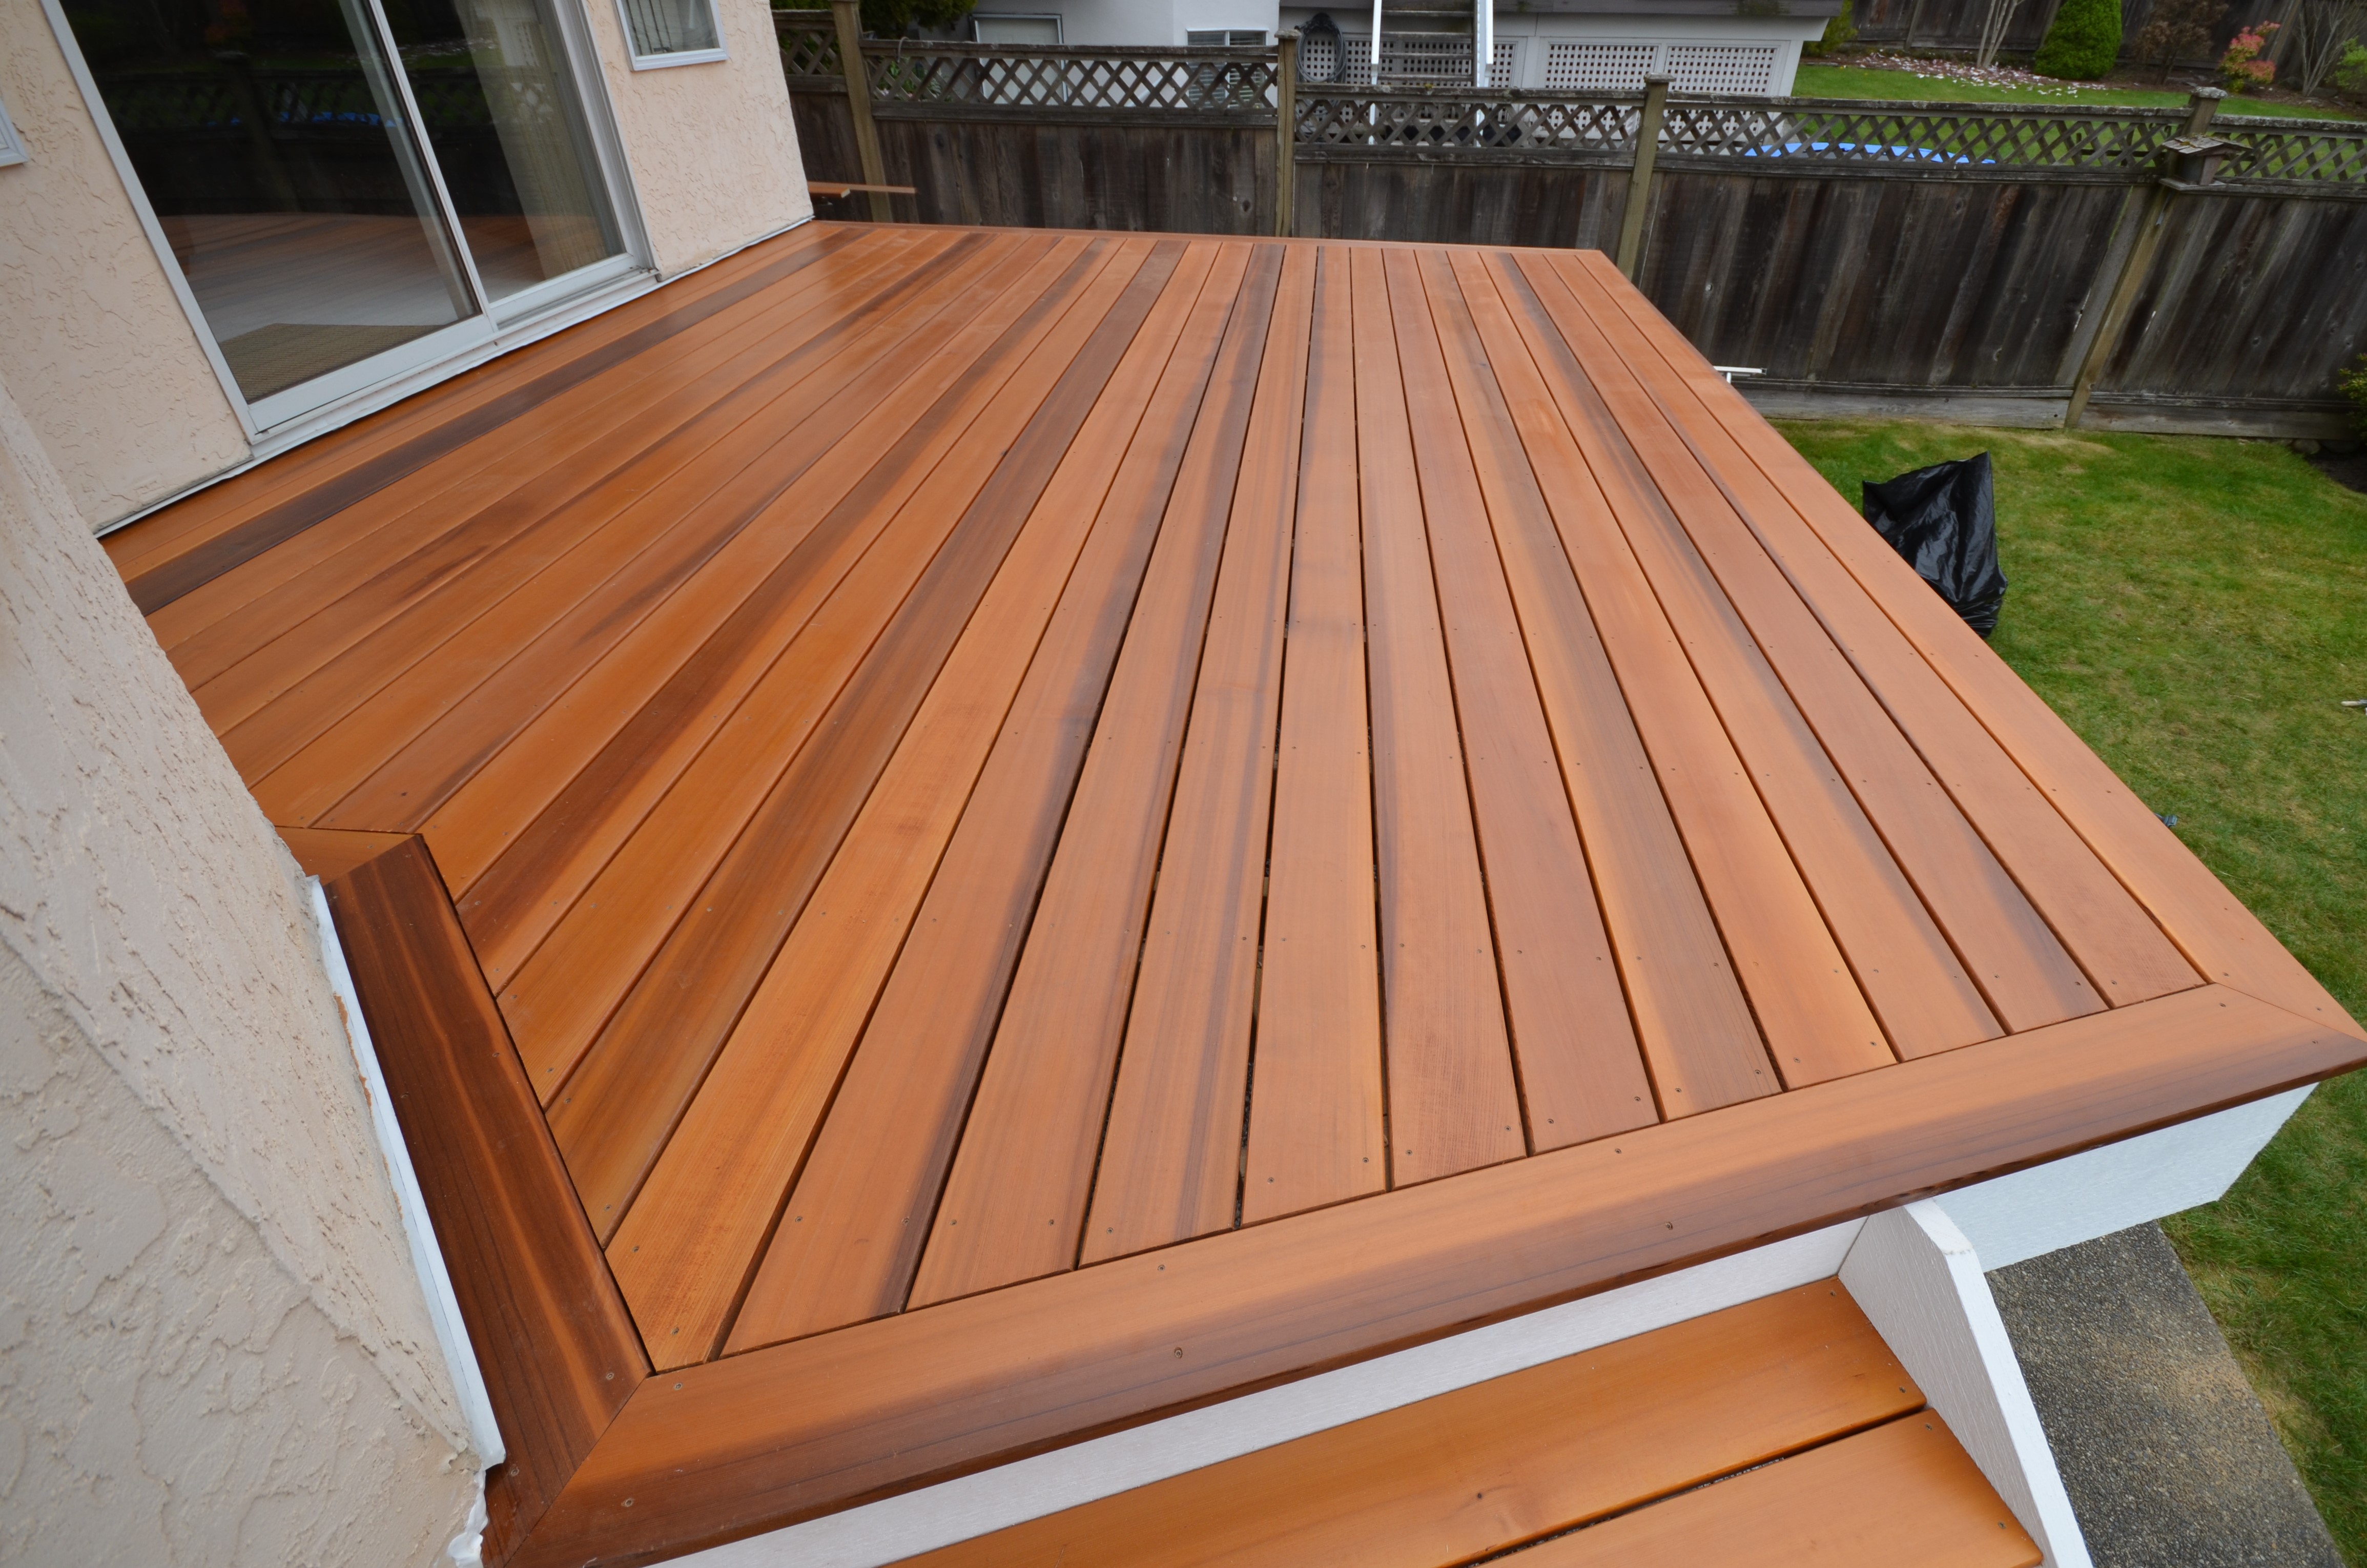 Cedar decking are easy to use and manage